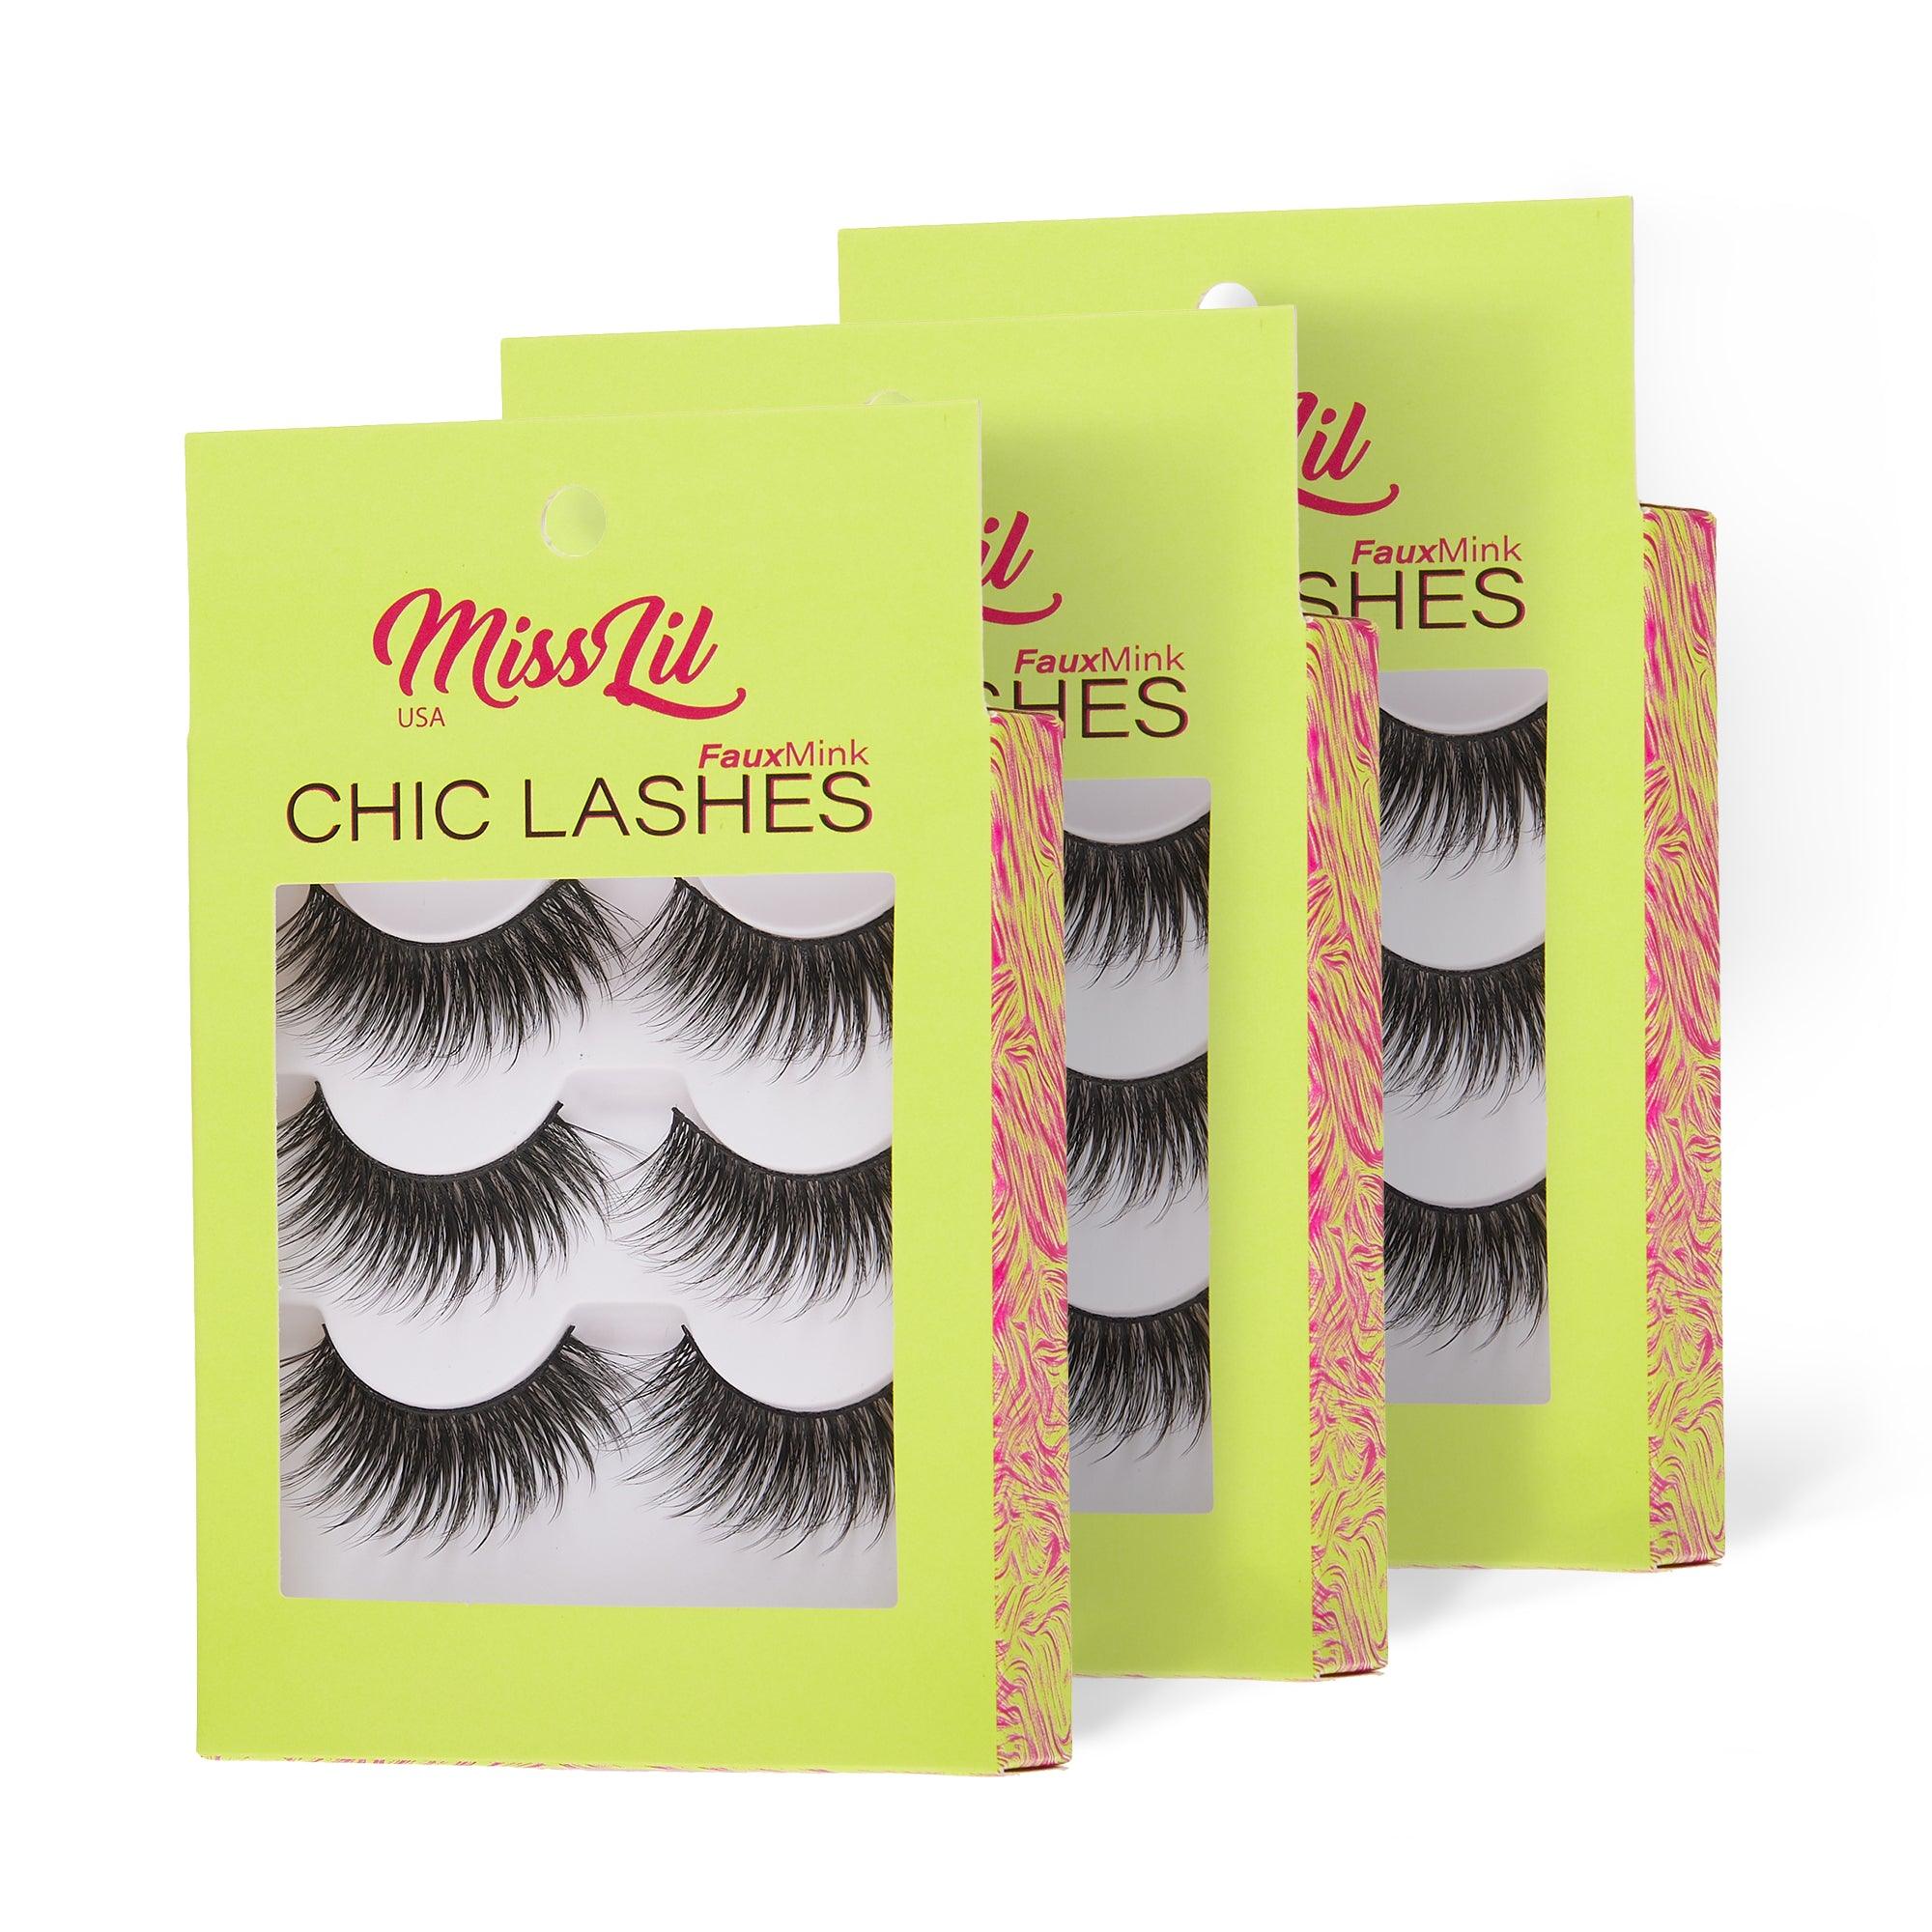 3-Pair Faux Mink Eyelashes - Chic Lashes Collection #30 - Pack of 3 - Miss Lil USA